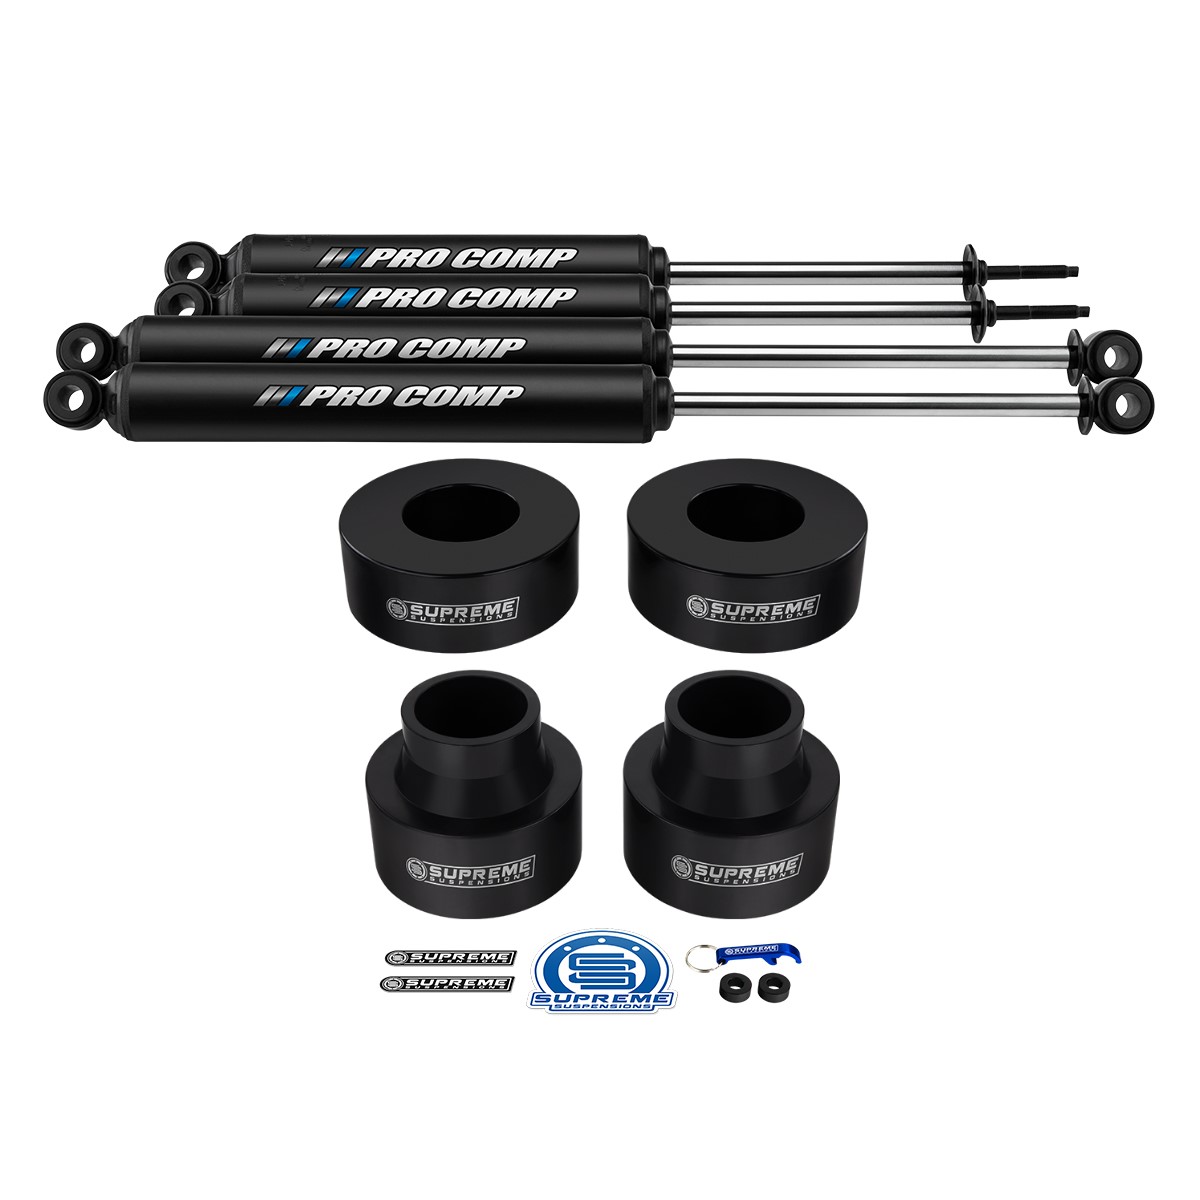 for grand cherokee wj front end rear raise series inch suspensions 4x4 truck accessories 99 00 01 02 03 04 Leveling best performance off road lift kit 1999 2000 2001 2002 2003 2004 premium new level body trucks Automotive Body Parts Full-Size Pickup Truck Accessories Replacement Parts Direct Installation Lift Spacers High-Performance Lift Kit Increase Ground Clearance Install Custom Wheels And Tires all-terrain trucks